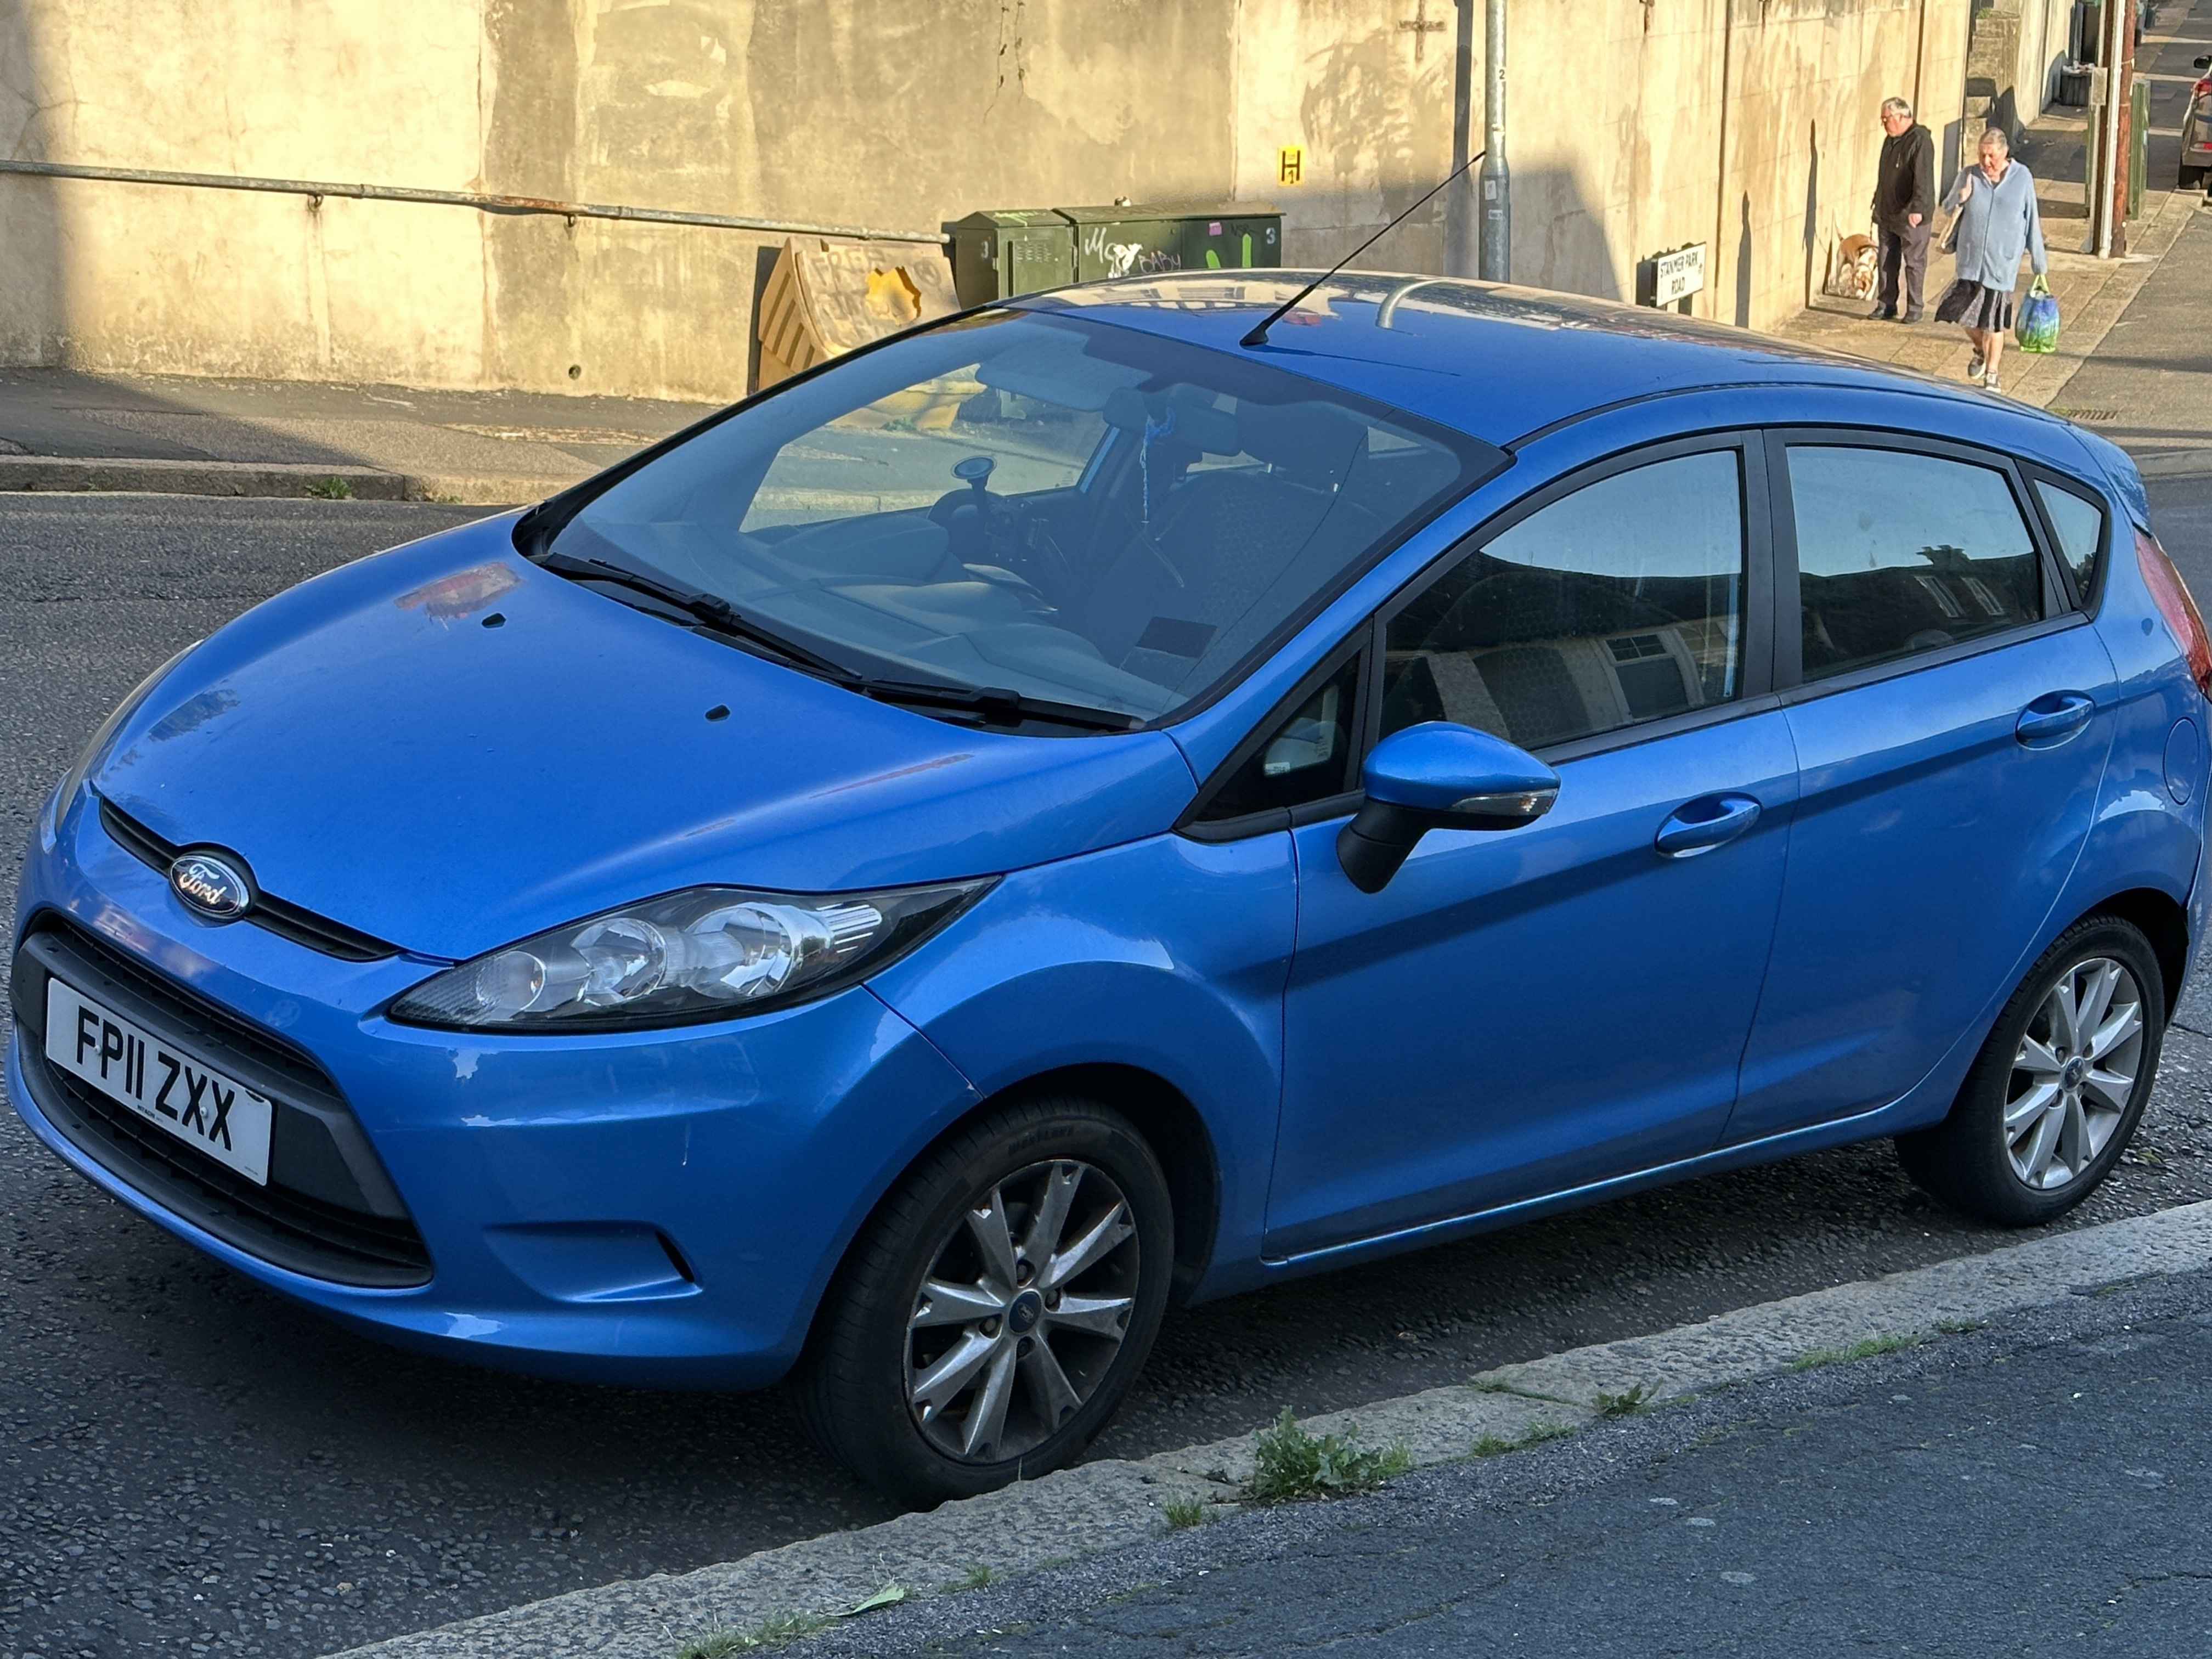 Photograph of FP11 ZXX - a Blue Ford Fiesta parked in Hollingdean by a non-resident who uses the local area as part of their Brighton commute. 